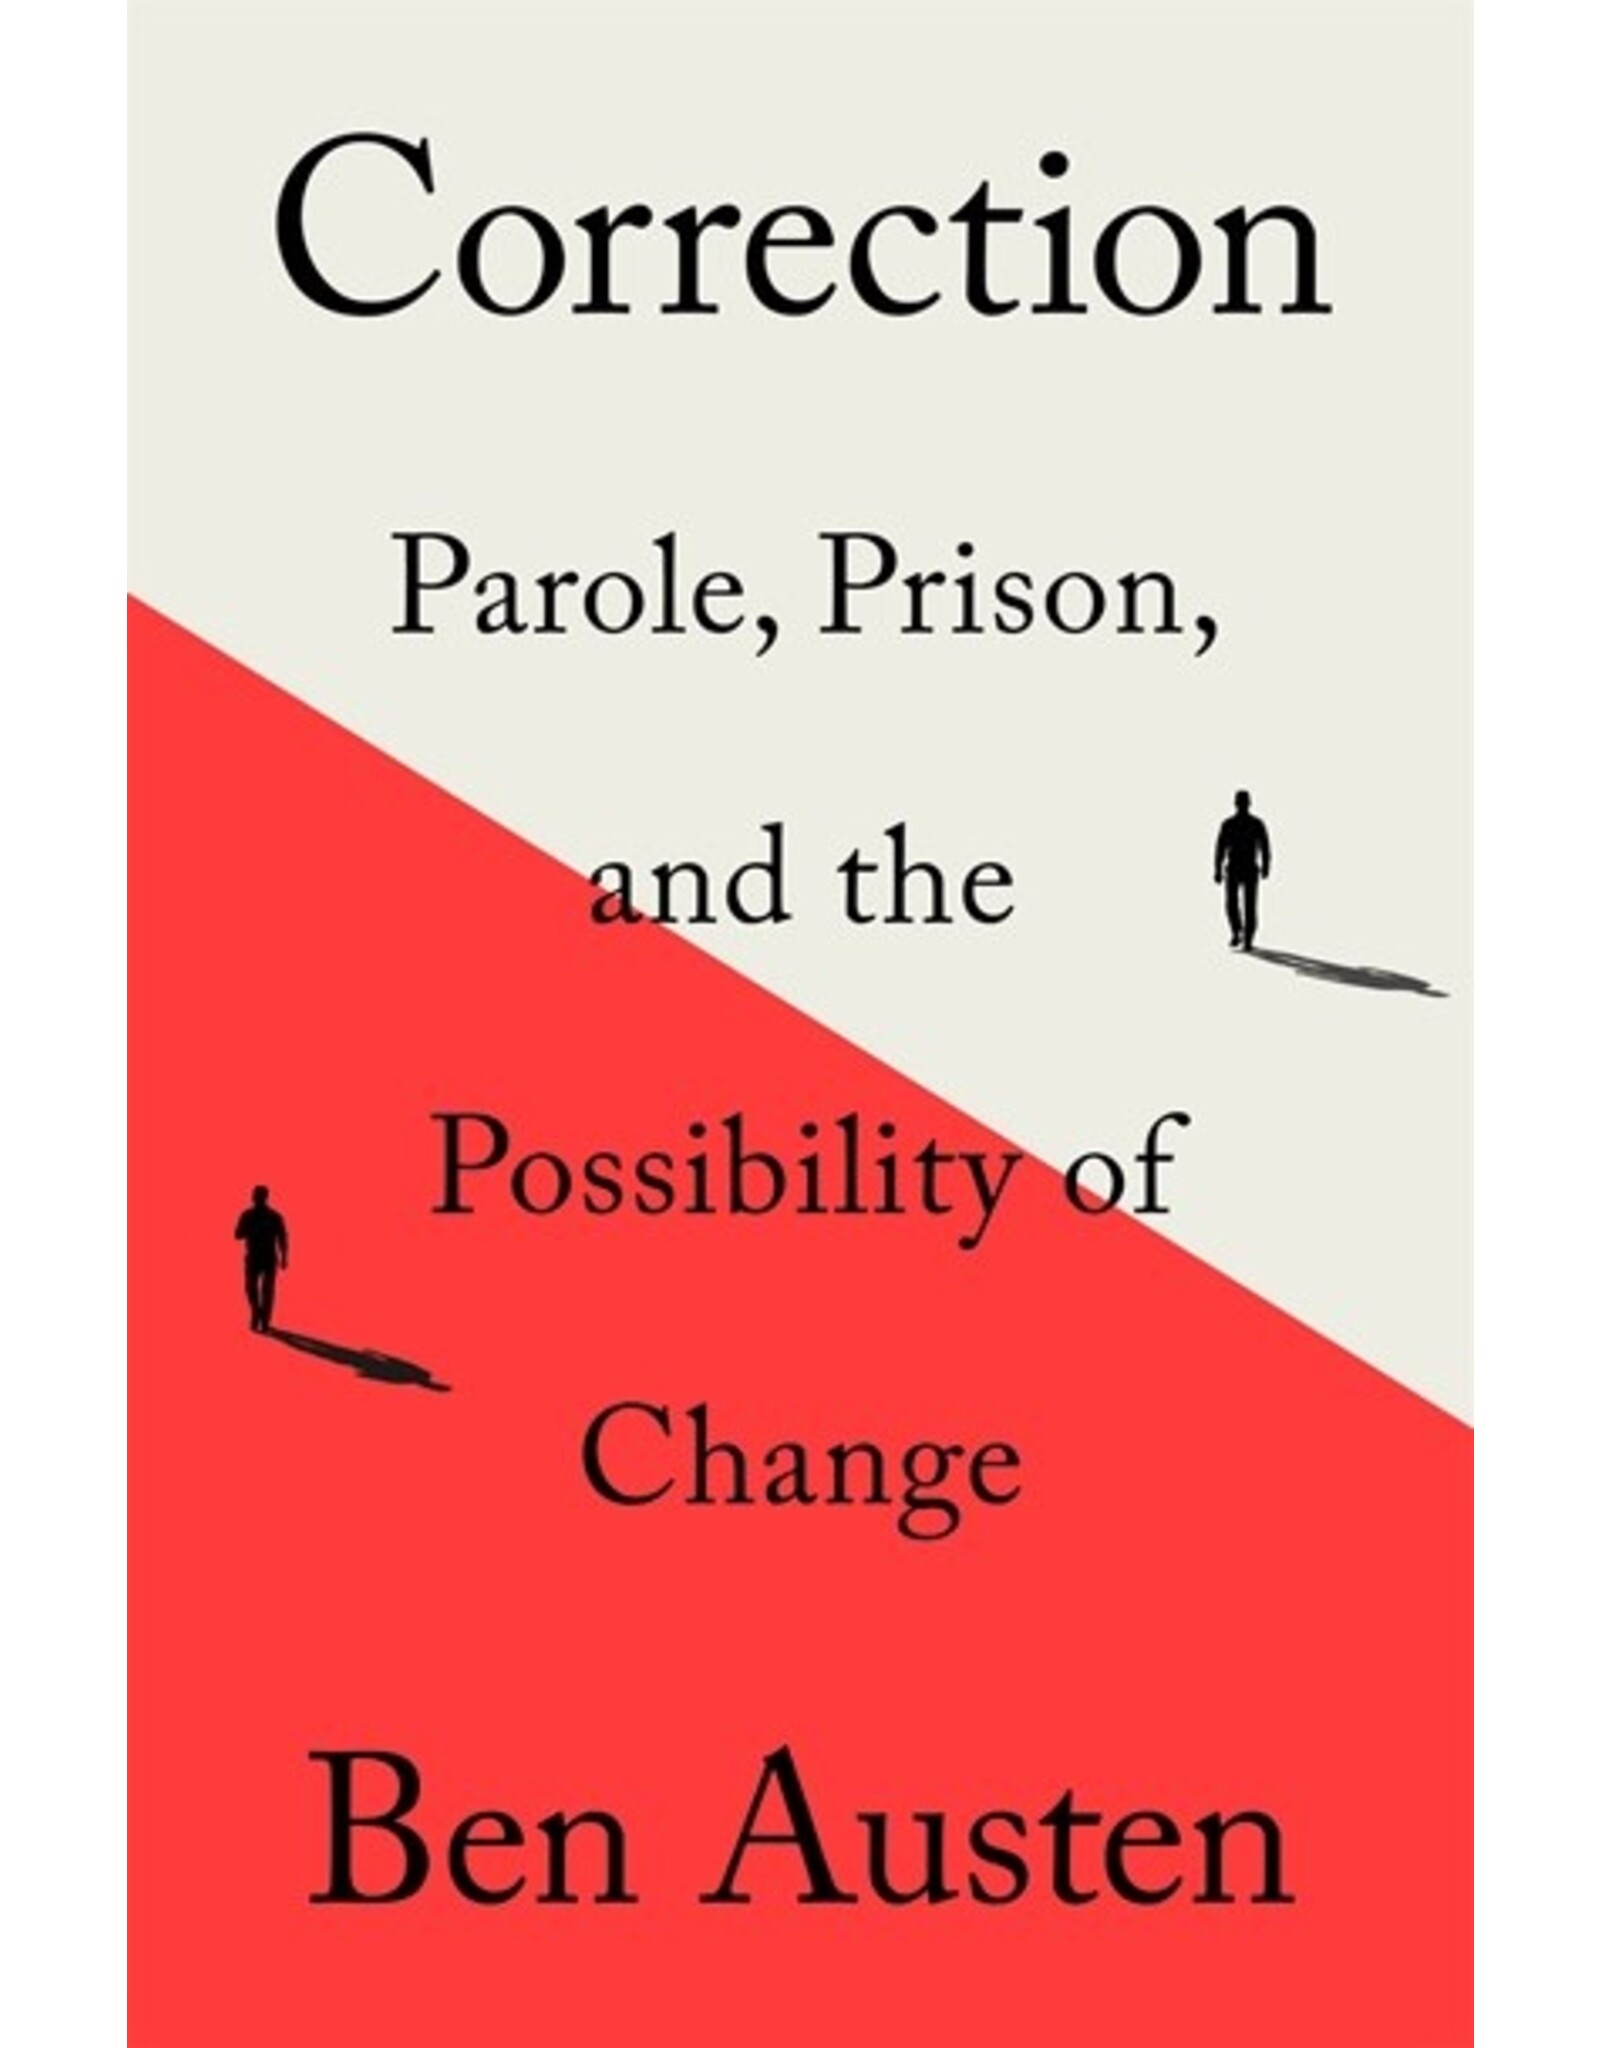 Books Correction: Parole, Prison, and Possiblity of Change by Ben Austen